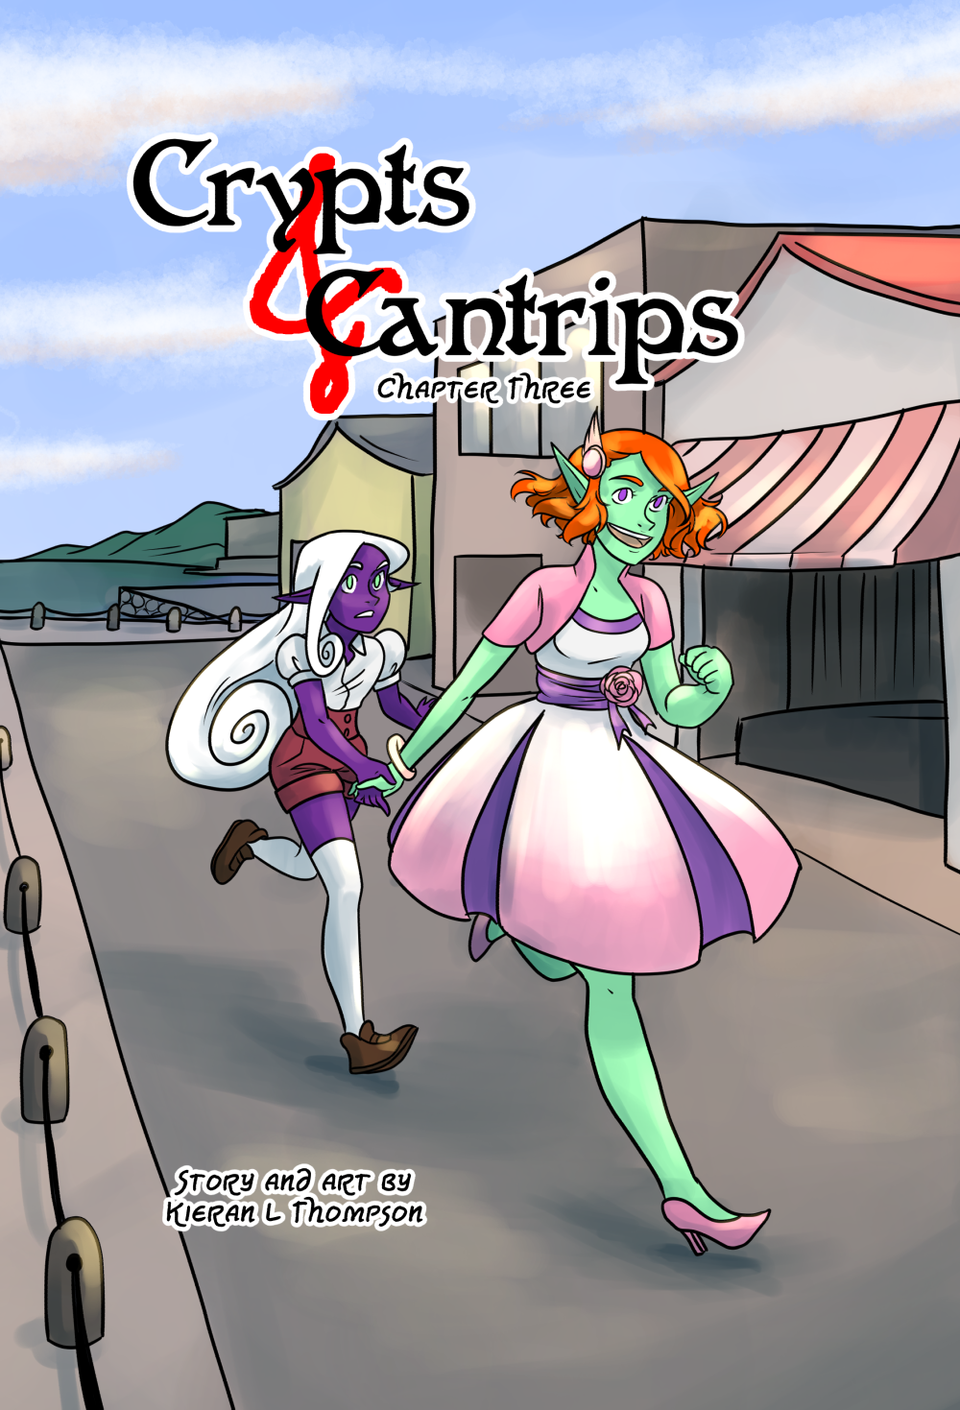 Volume 1, Chapter 3, Cover